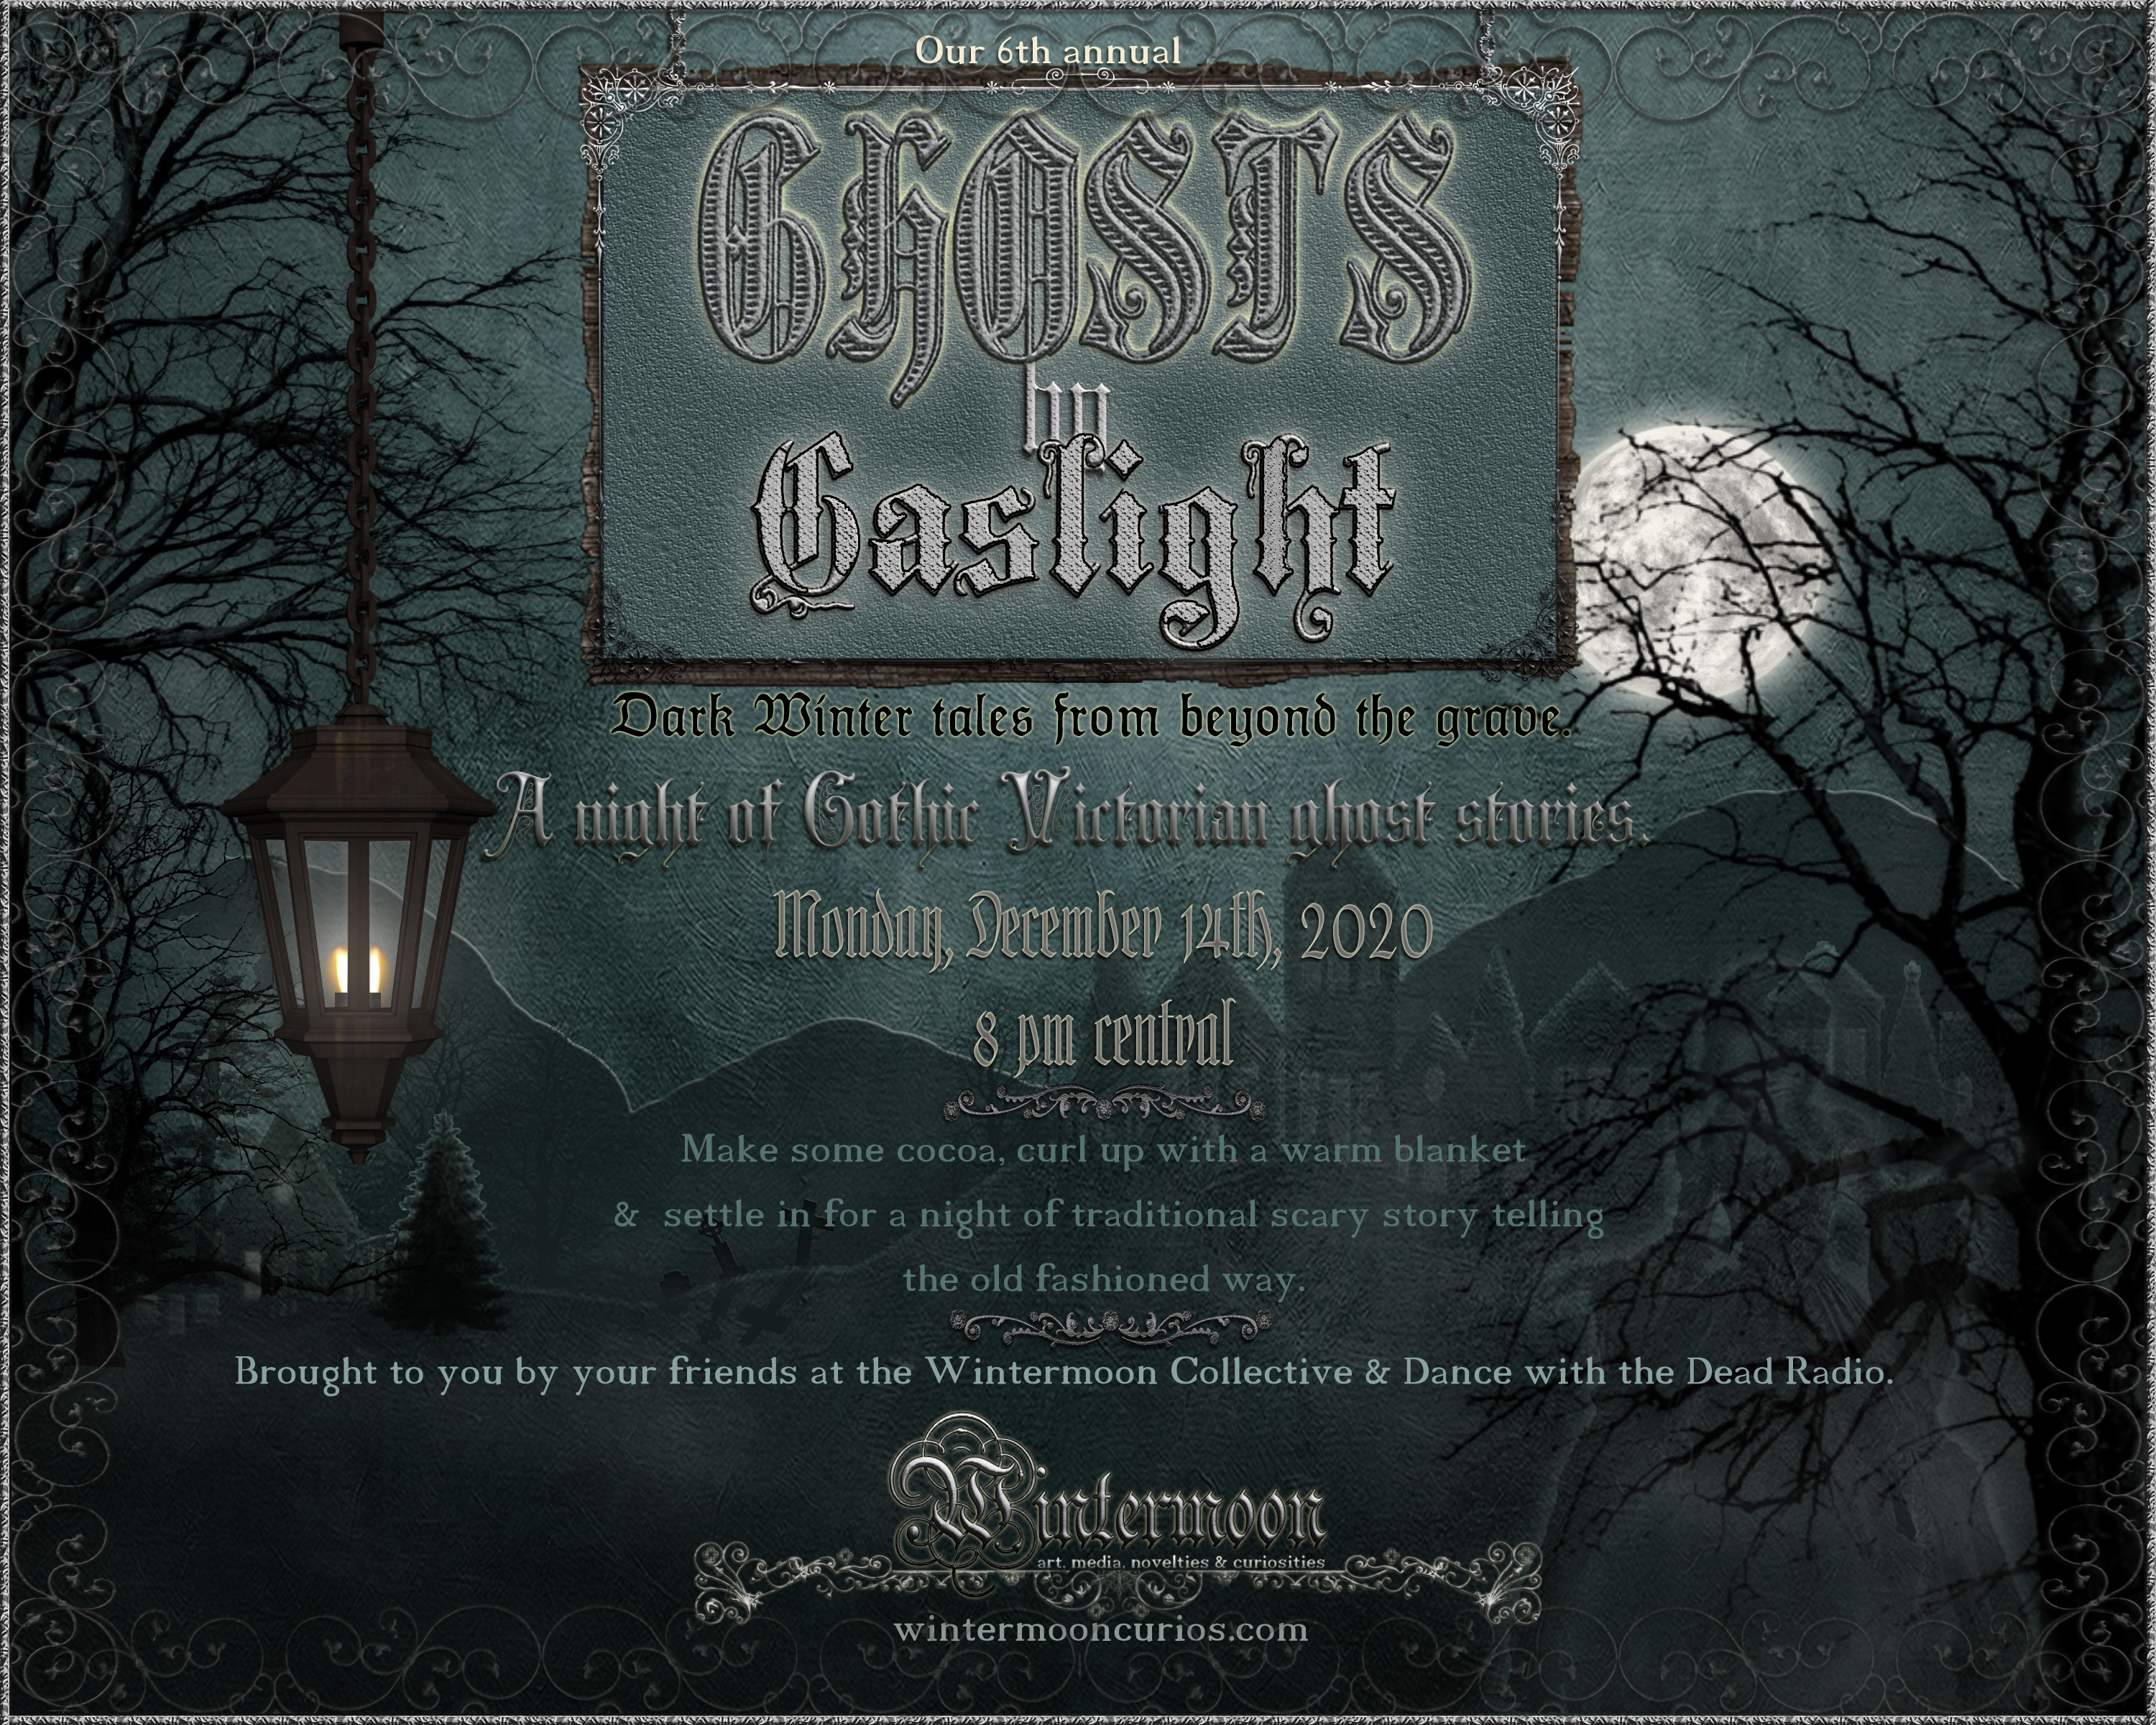 ghosts by gaslight information graphic